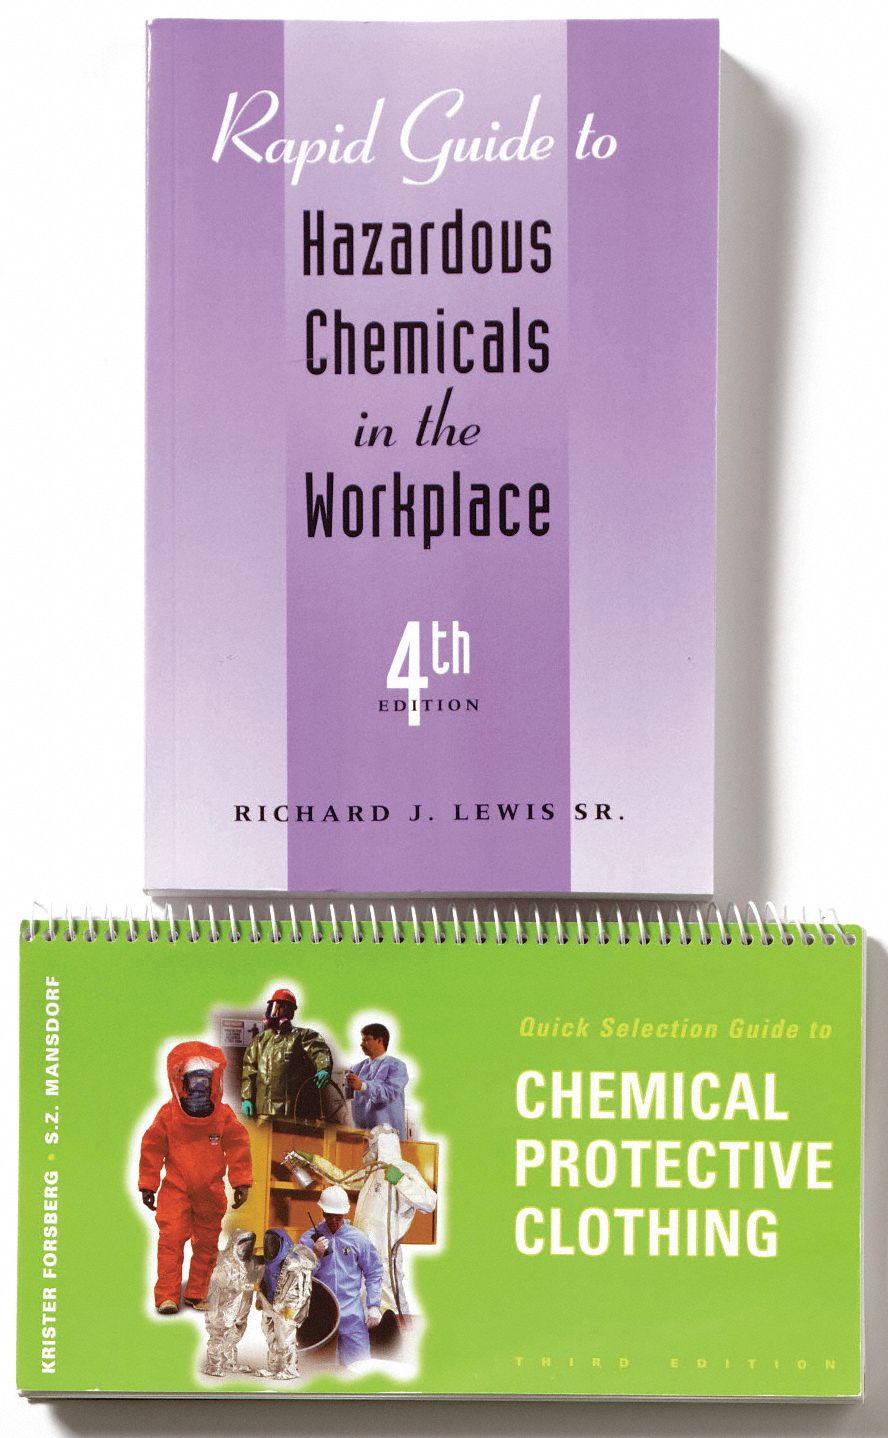 Quick Selection Guide: Book/Booklet, Chemical Safety, Chemical/HAZMAT Training